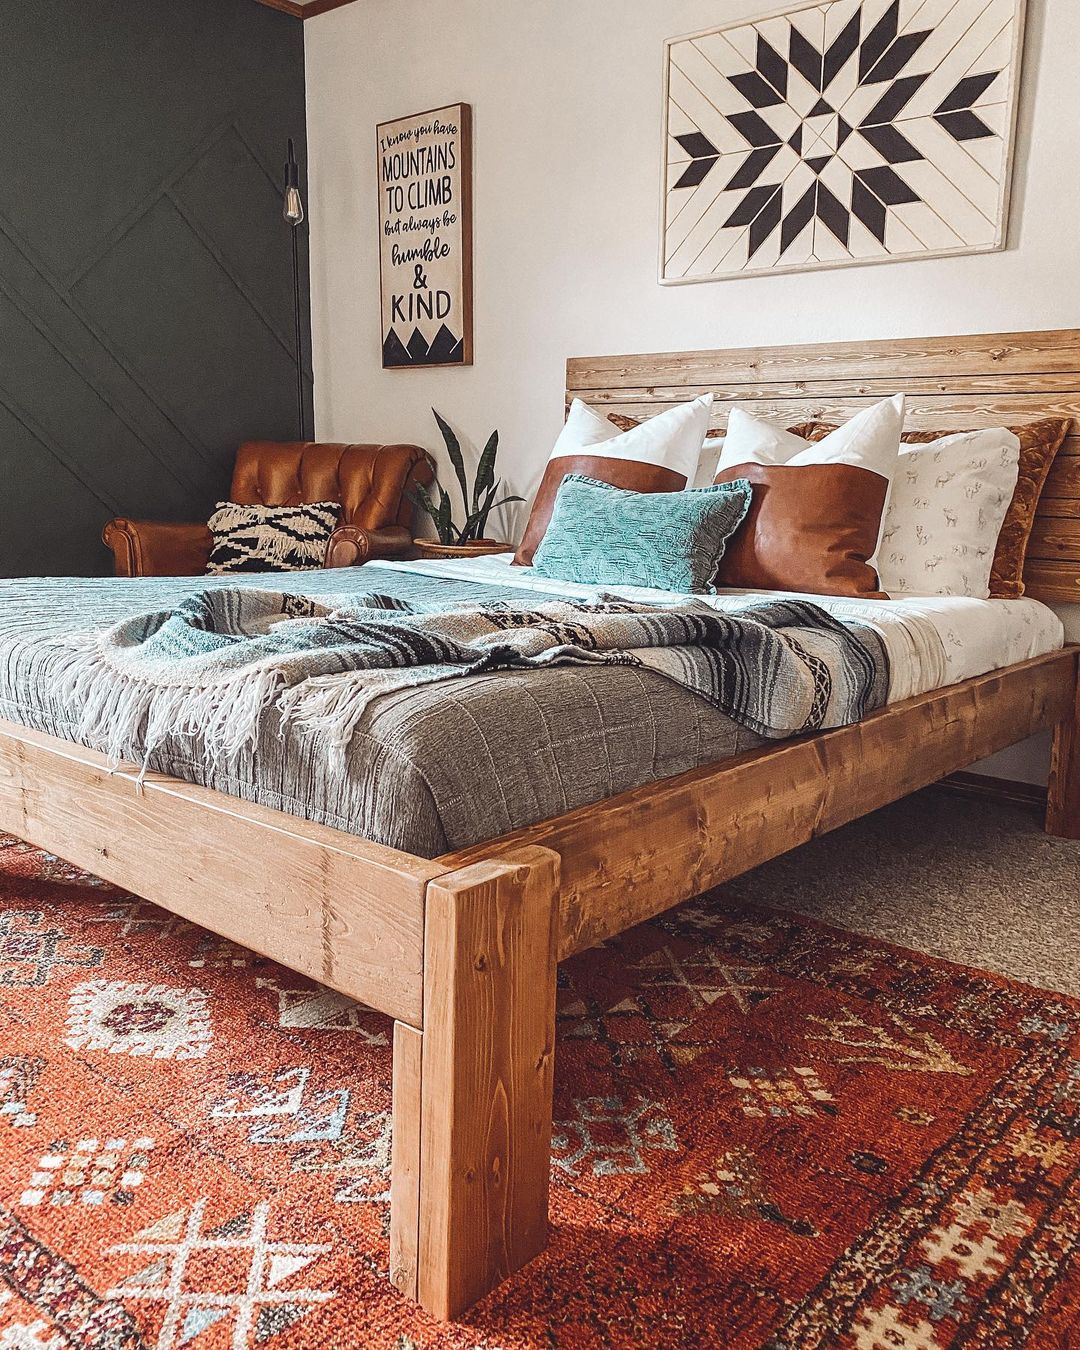 A bed in a homemade wooden frame and headboard. Photo by Instagram user @builditthrifty.